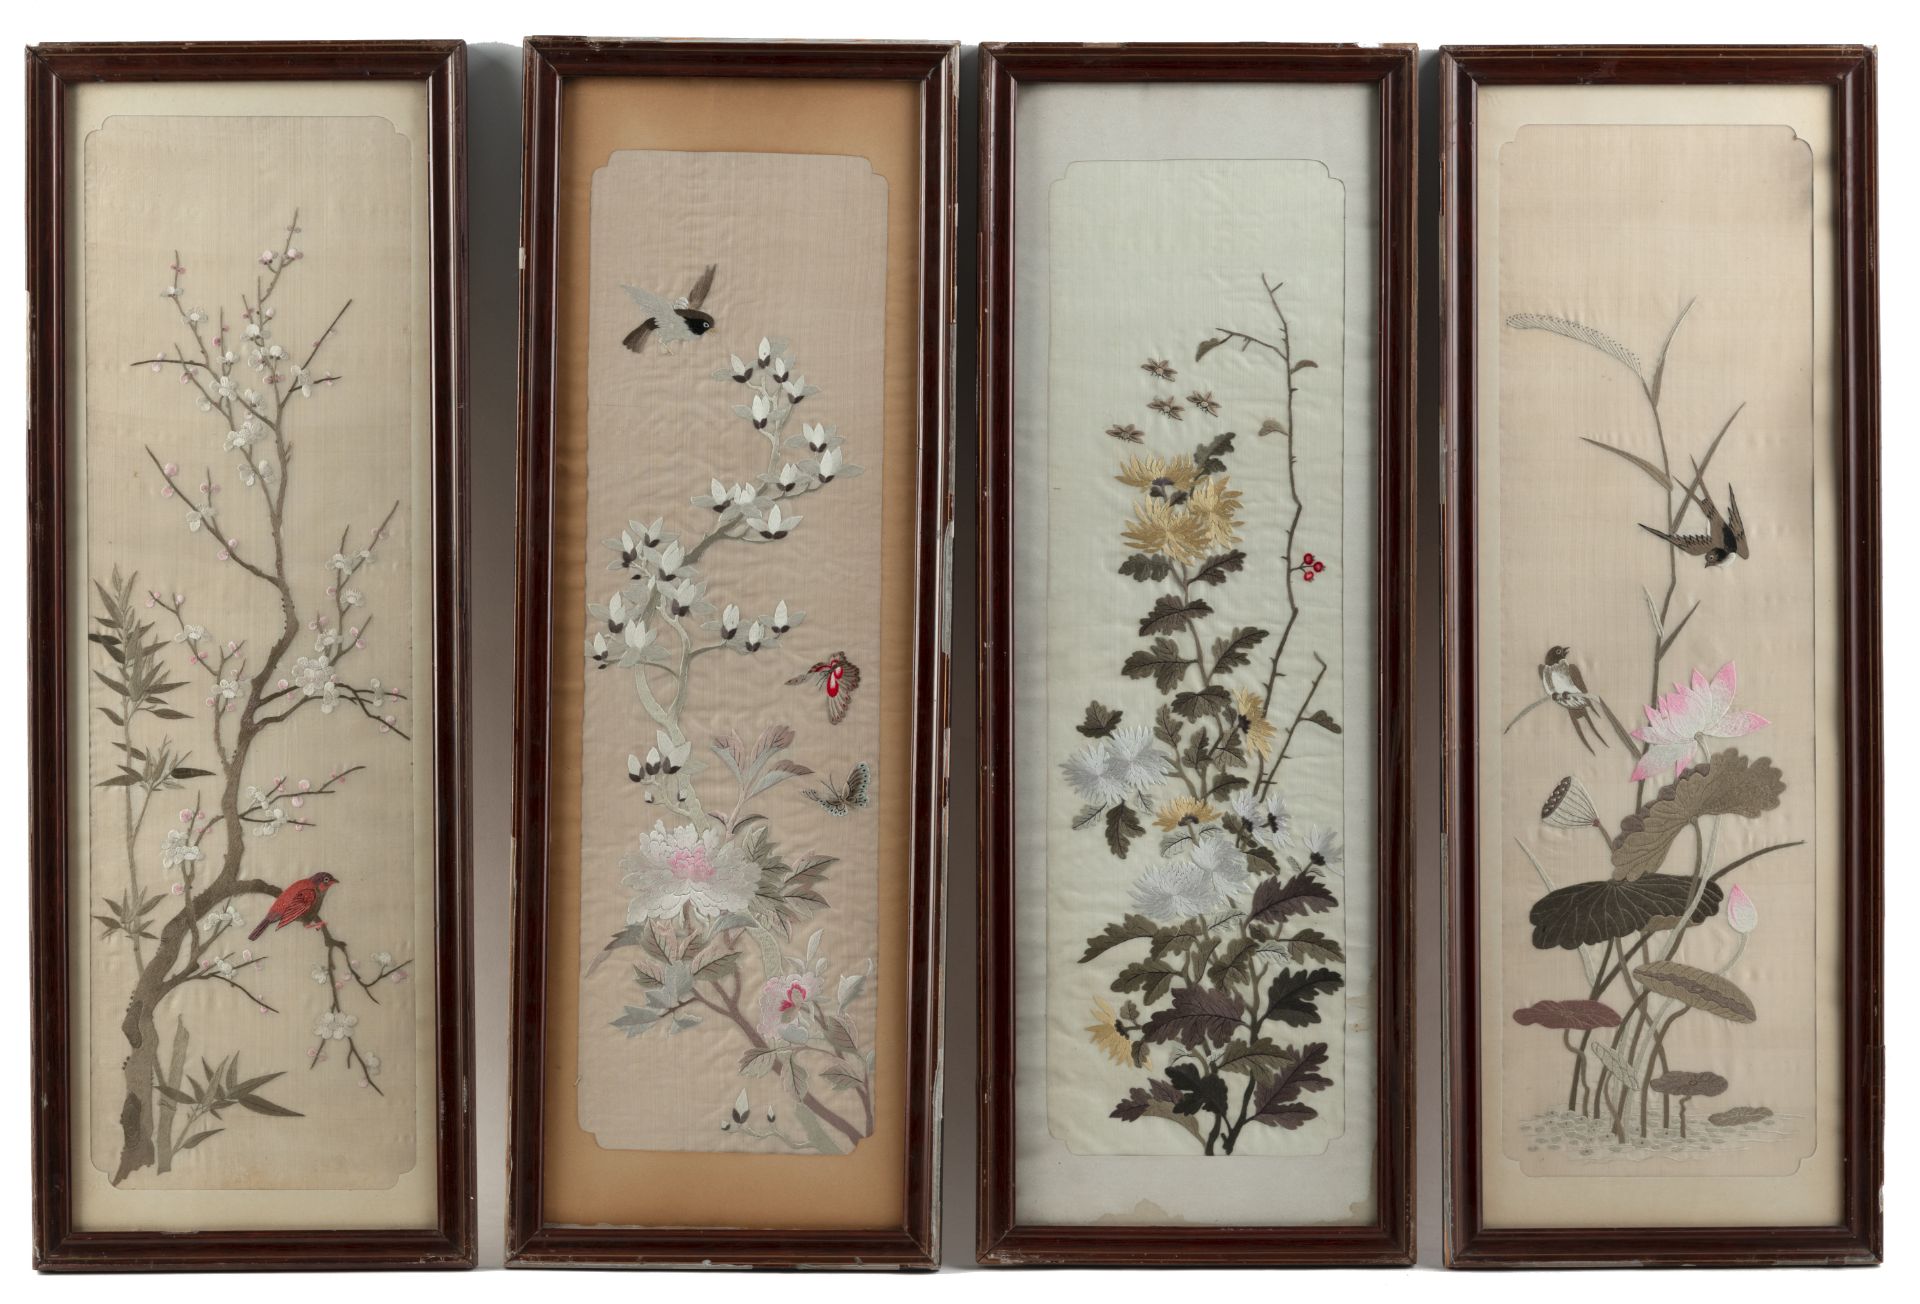 FOUR SILK EMBROIDERED PICTURES DEPICTING FLOWERS AND BIRDS OF THE FOUR SEASONS